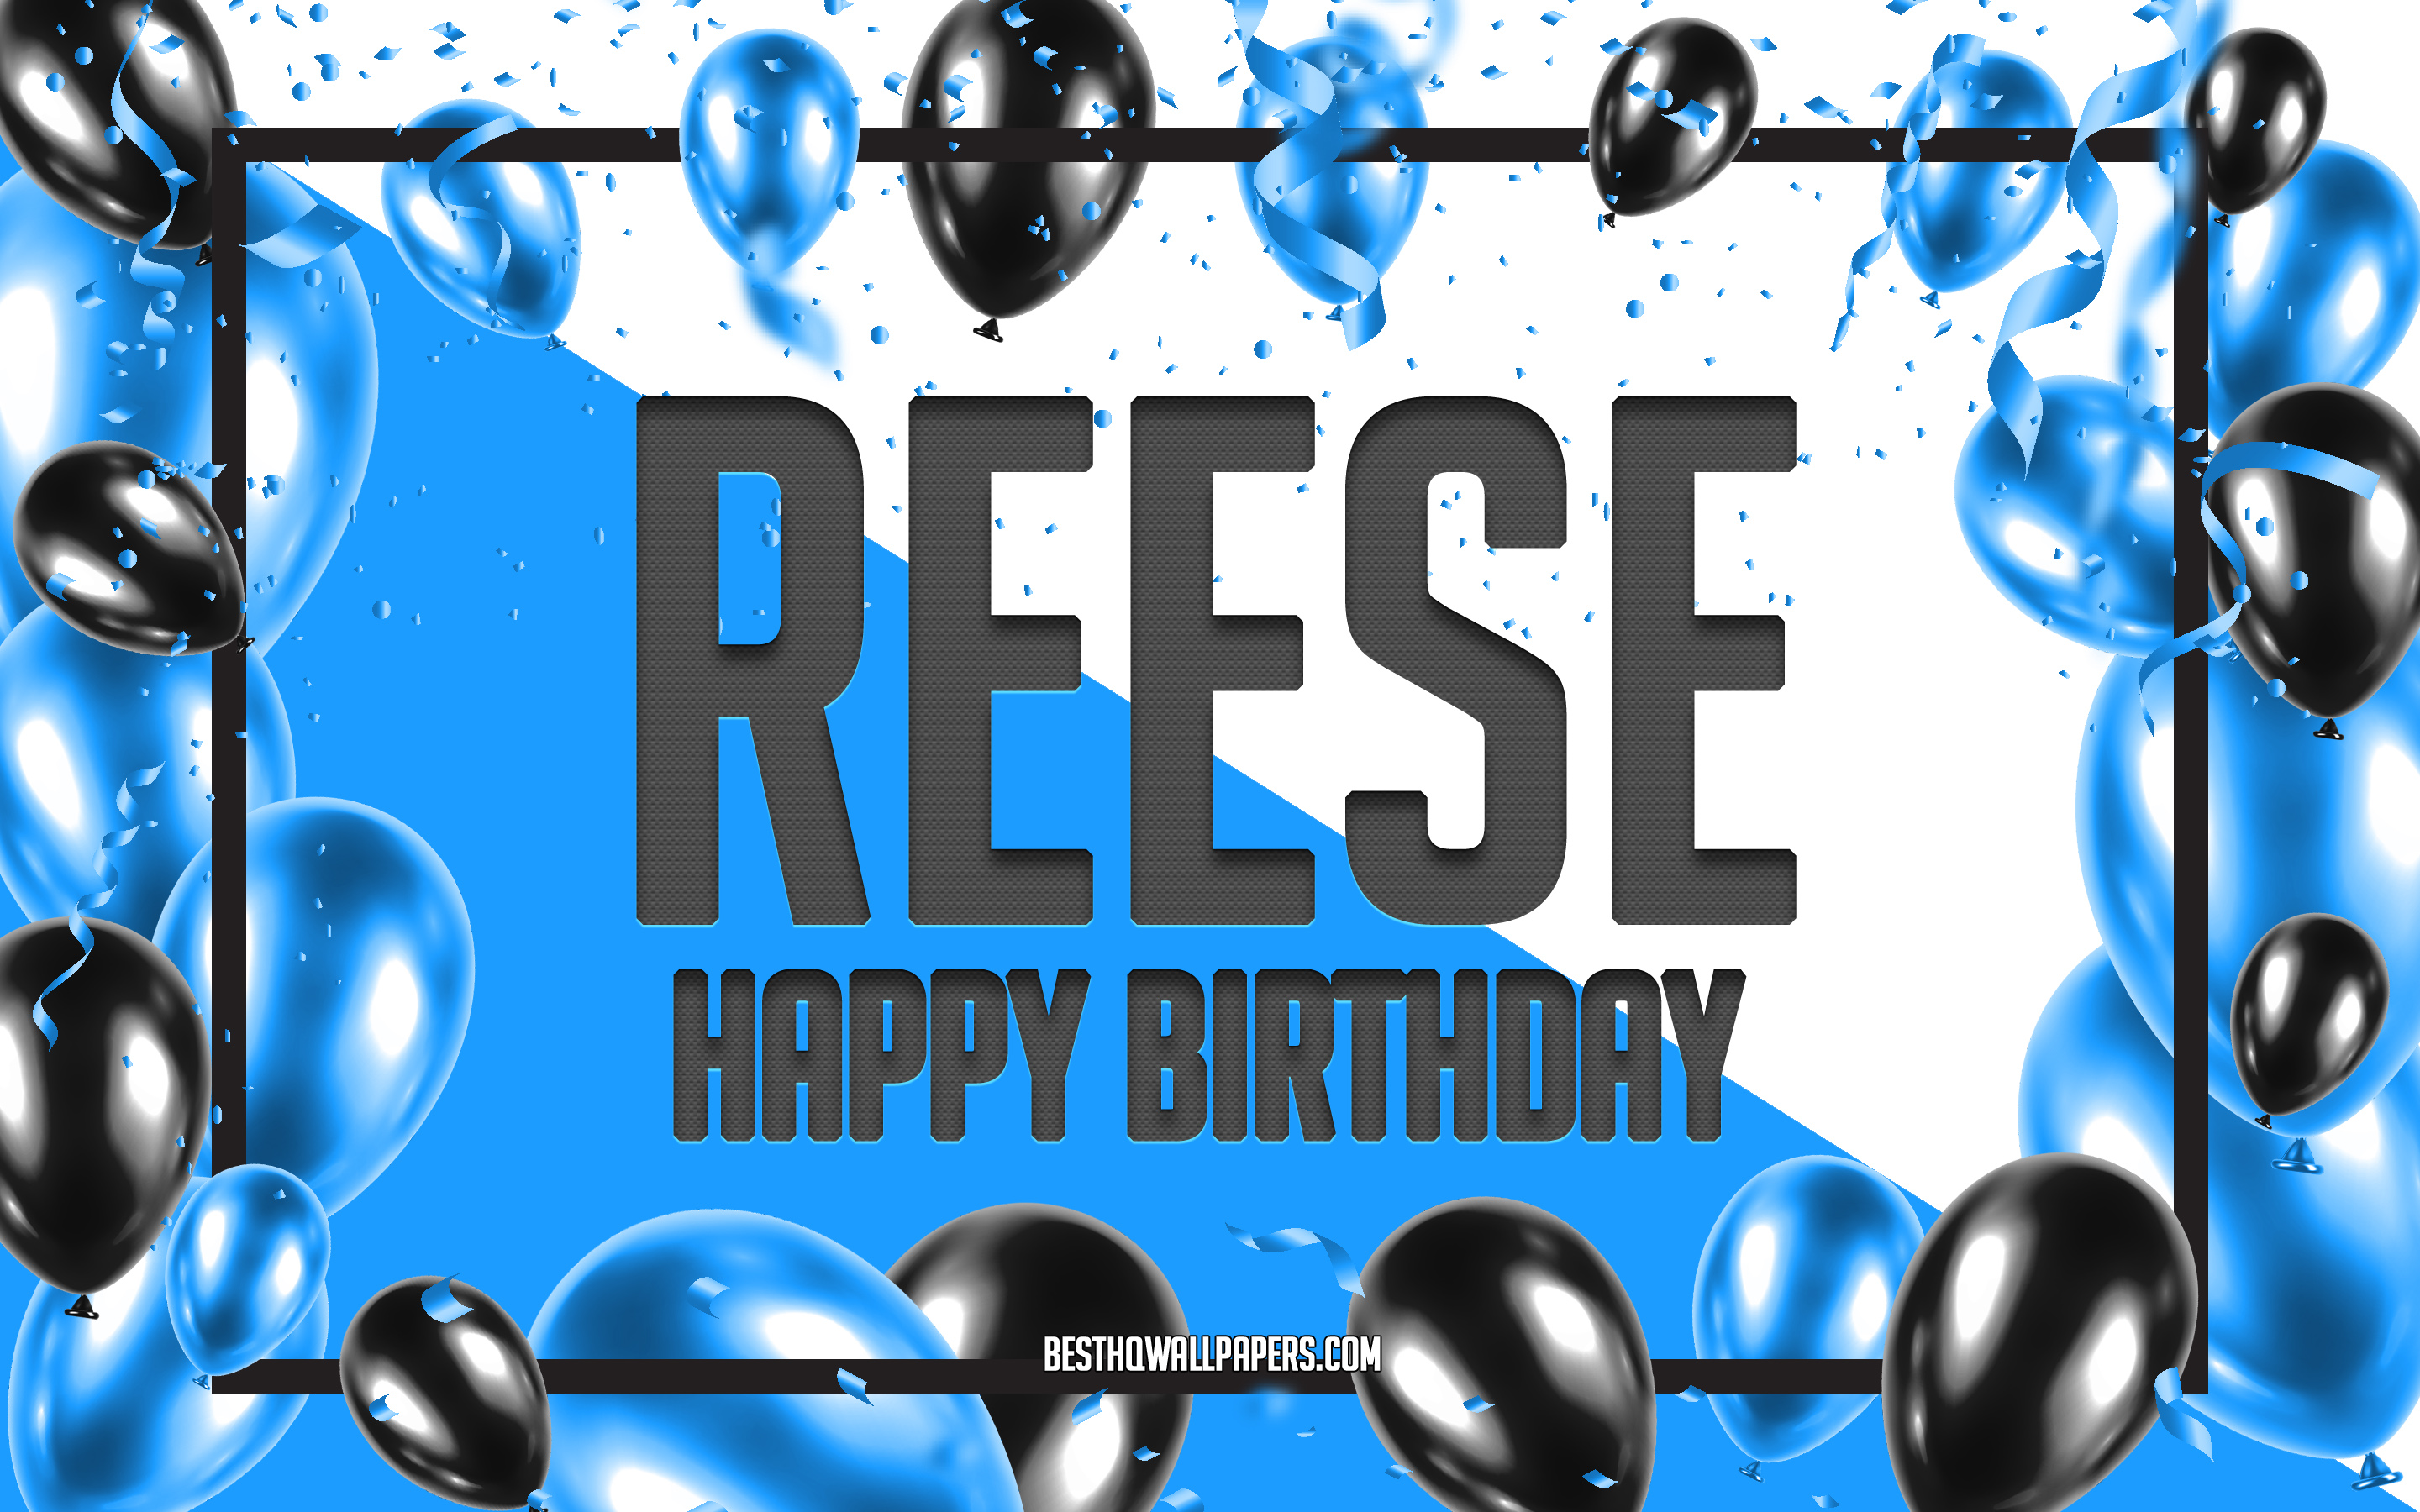 Reese Wallpapers